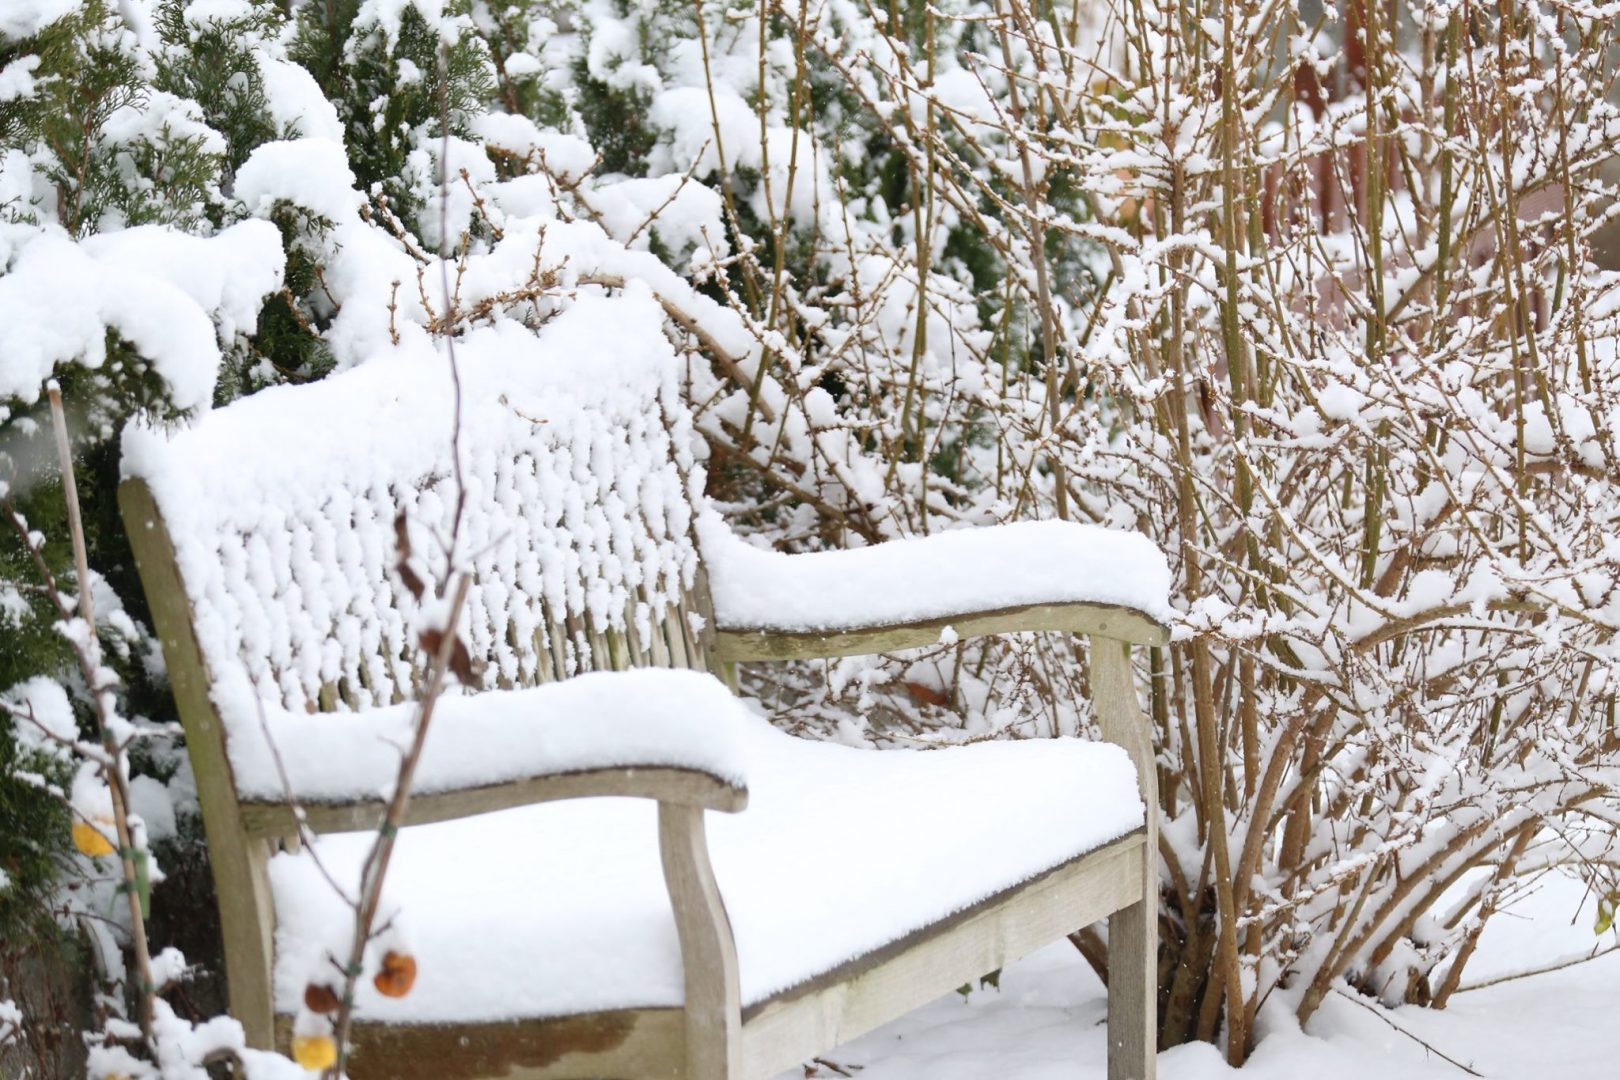 HOW TO CARE FOR YOUR OUTDOOR WOODEN FURNITURE THIS WINTER